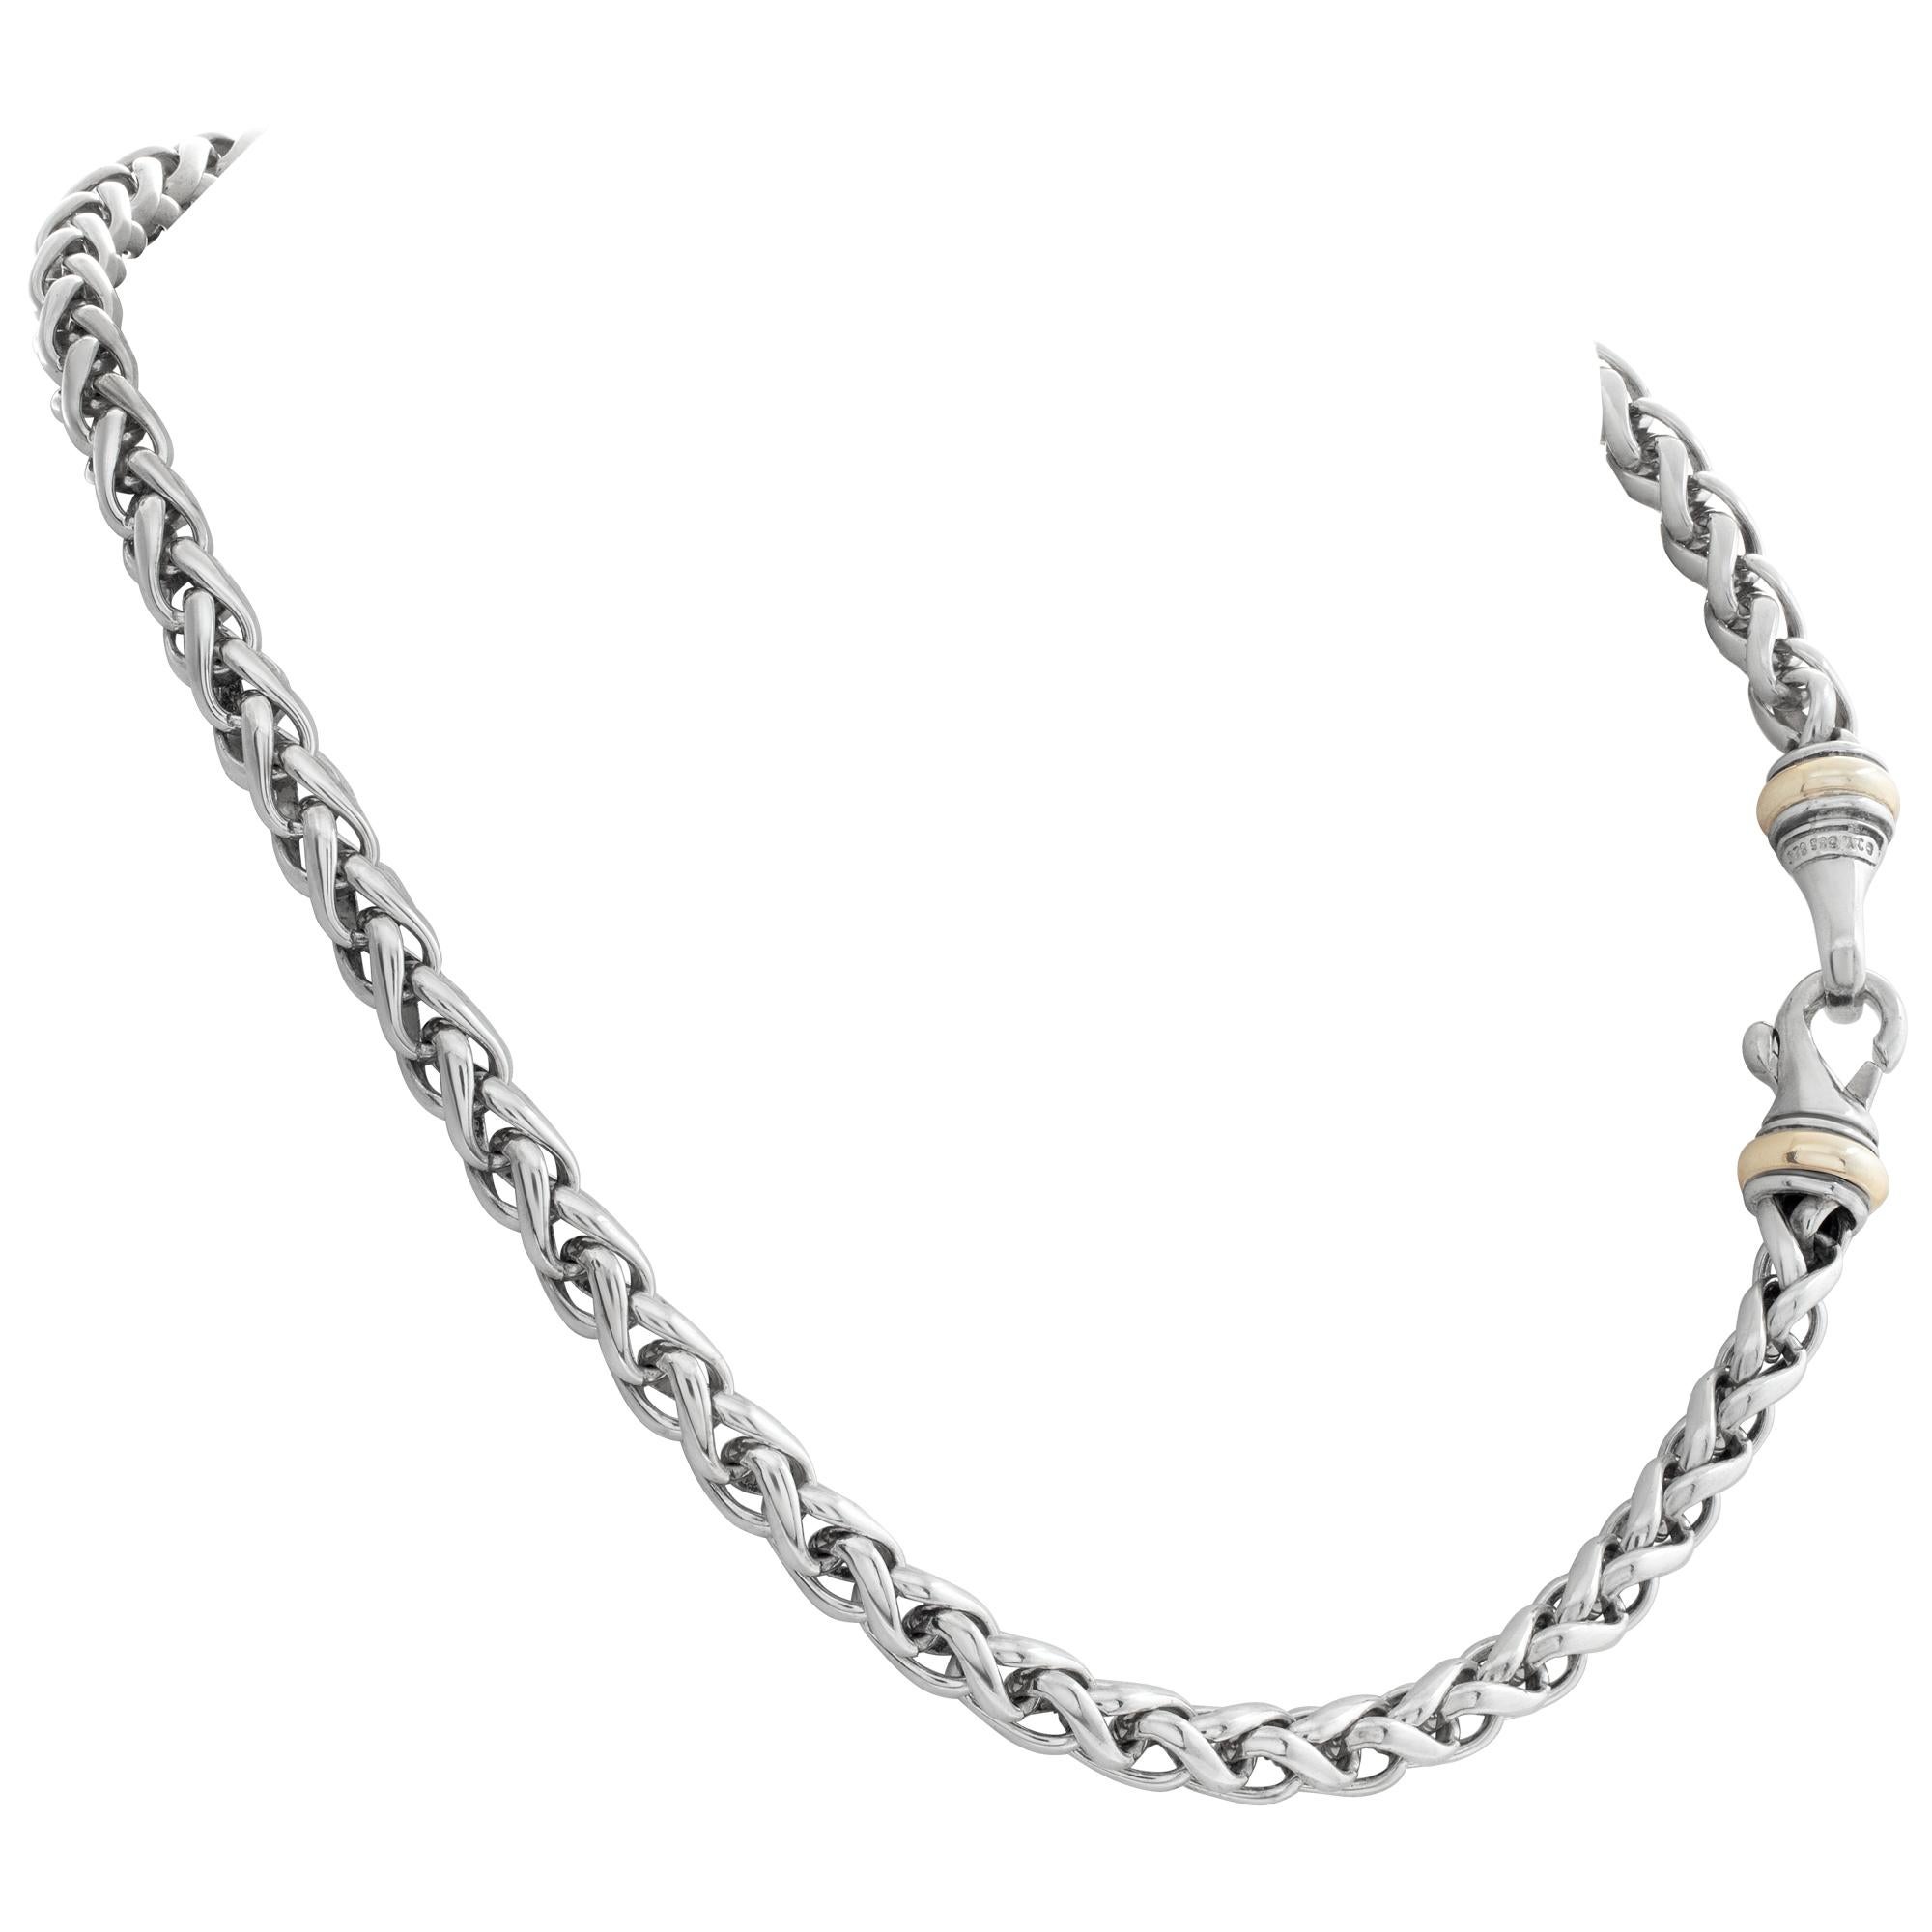 David Yurman Wheat 14k gold and sterling silver Chain Necklace In Excellent Condition For Sale In Surfside, FL